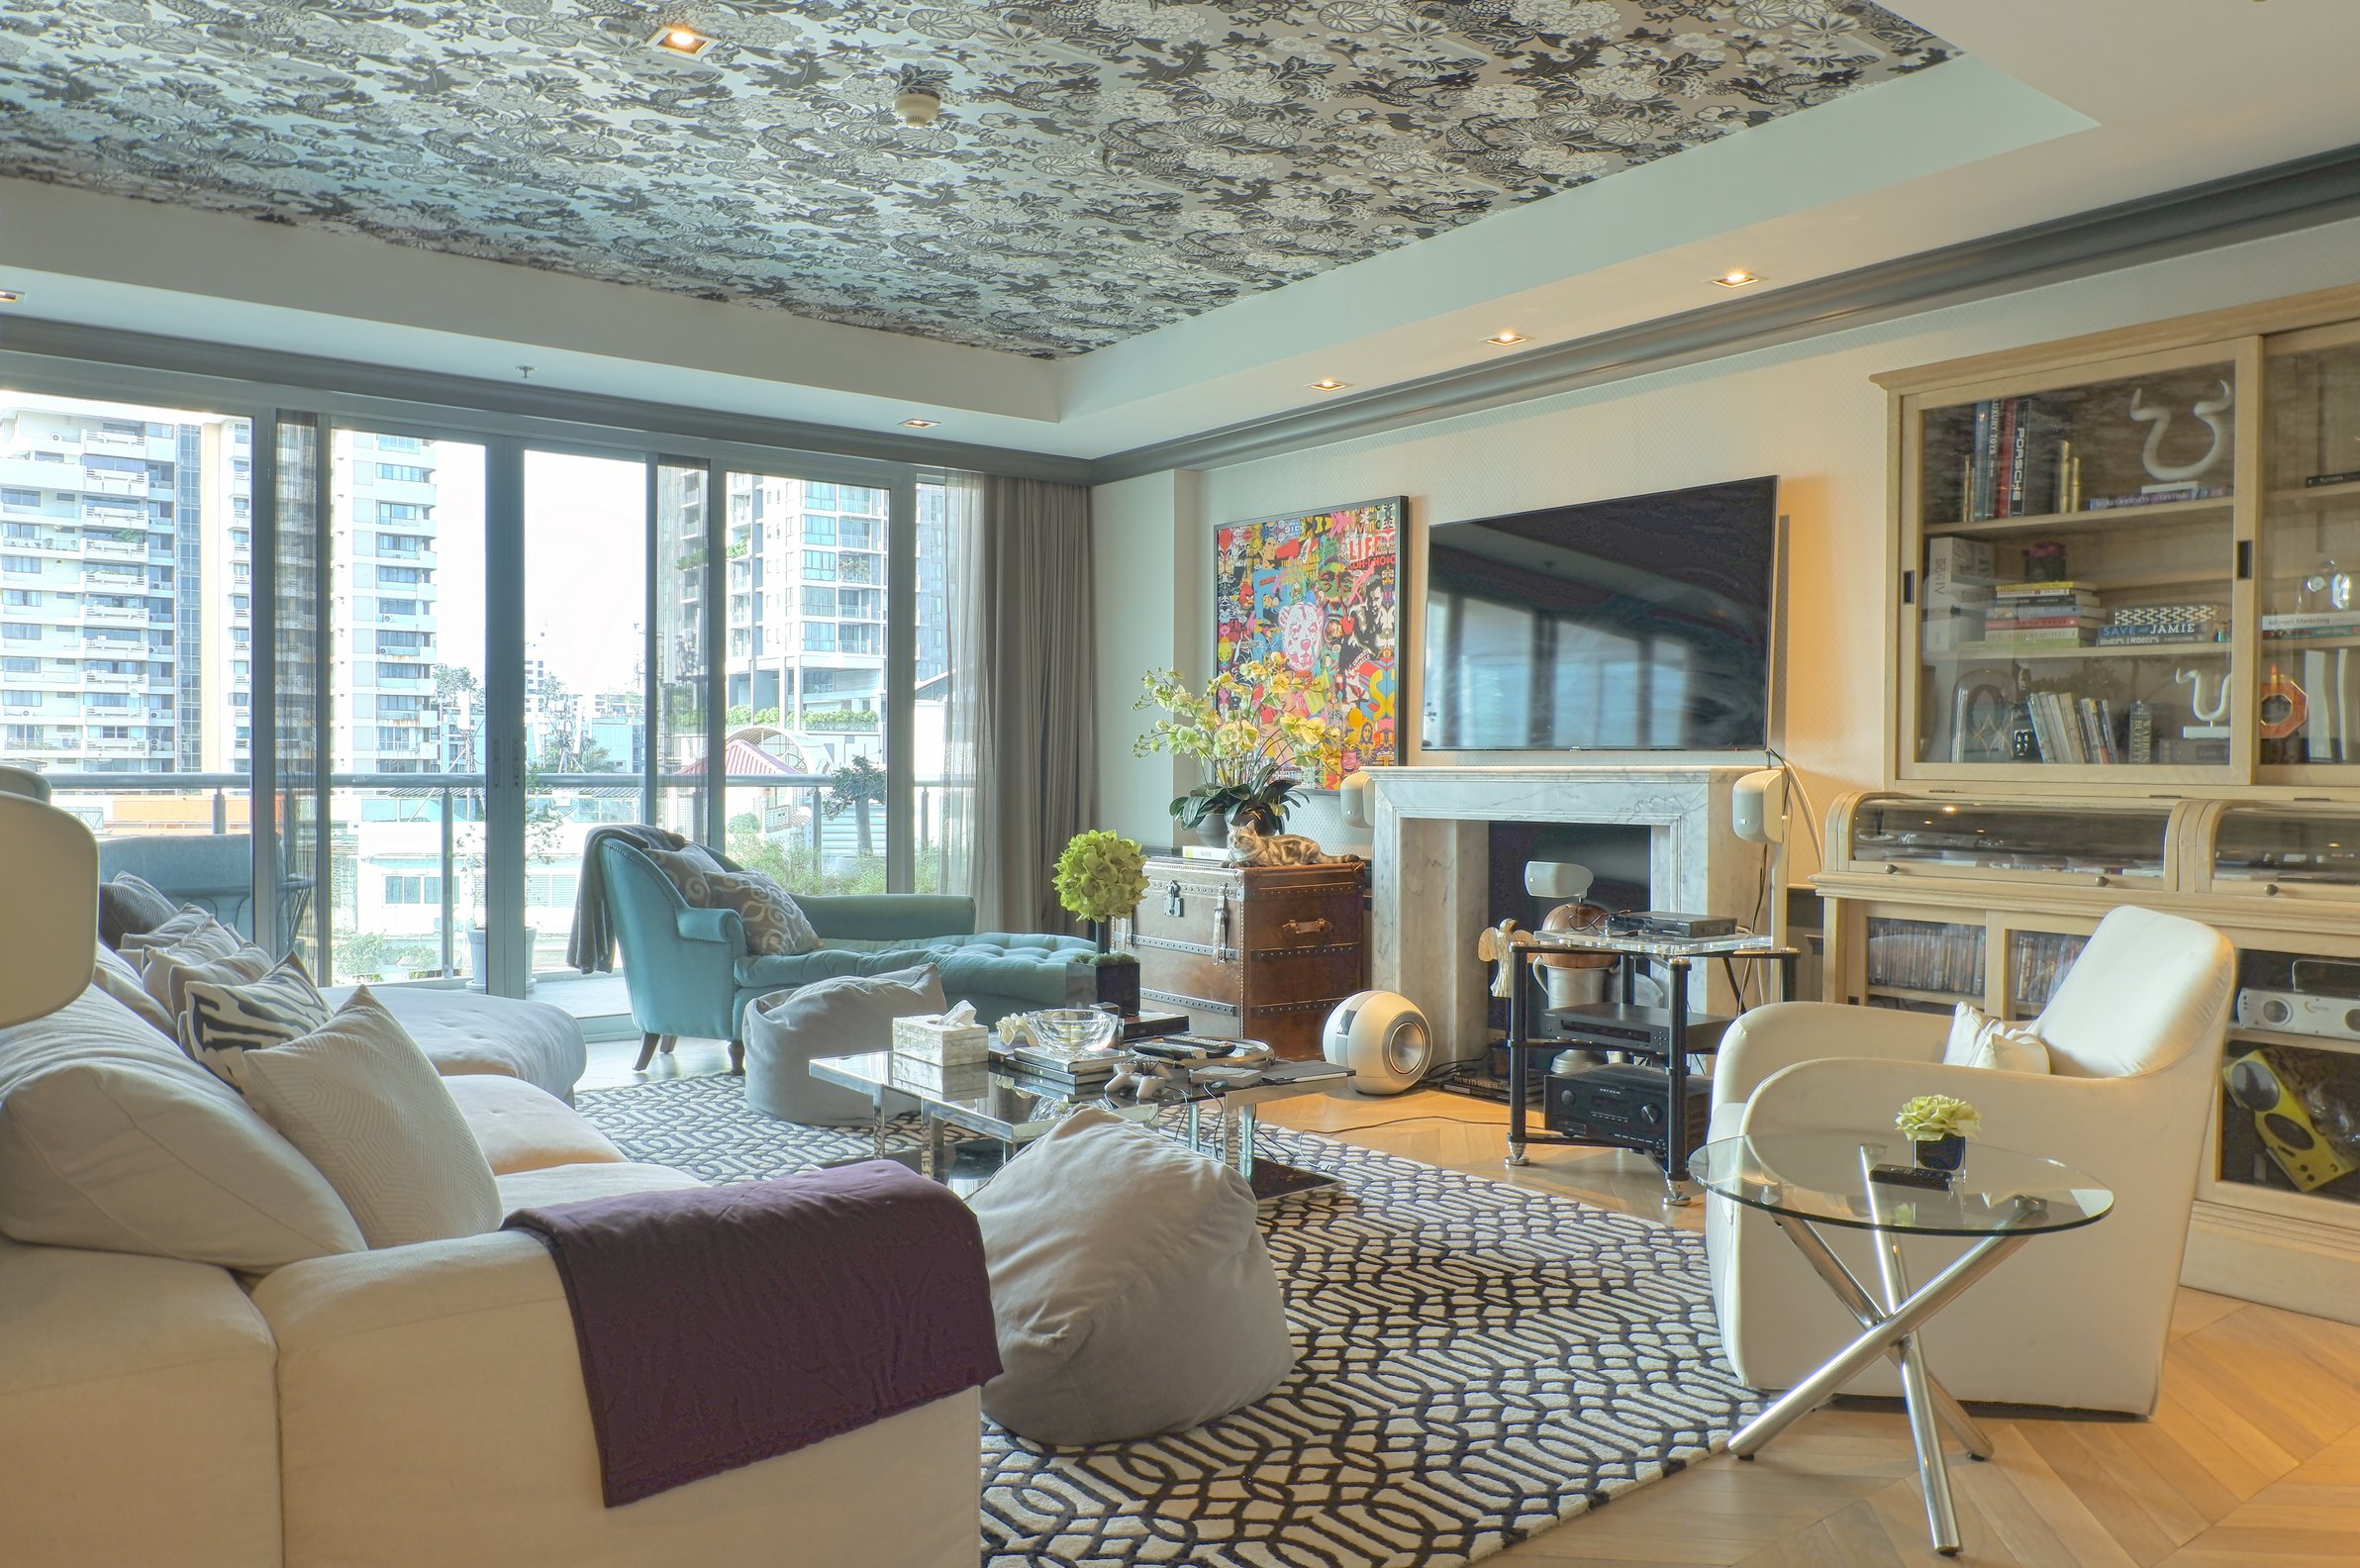 Penthouses in central Bangkok,a growing imbalance between demand and supply 